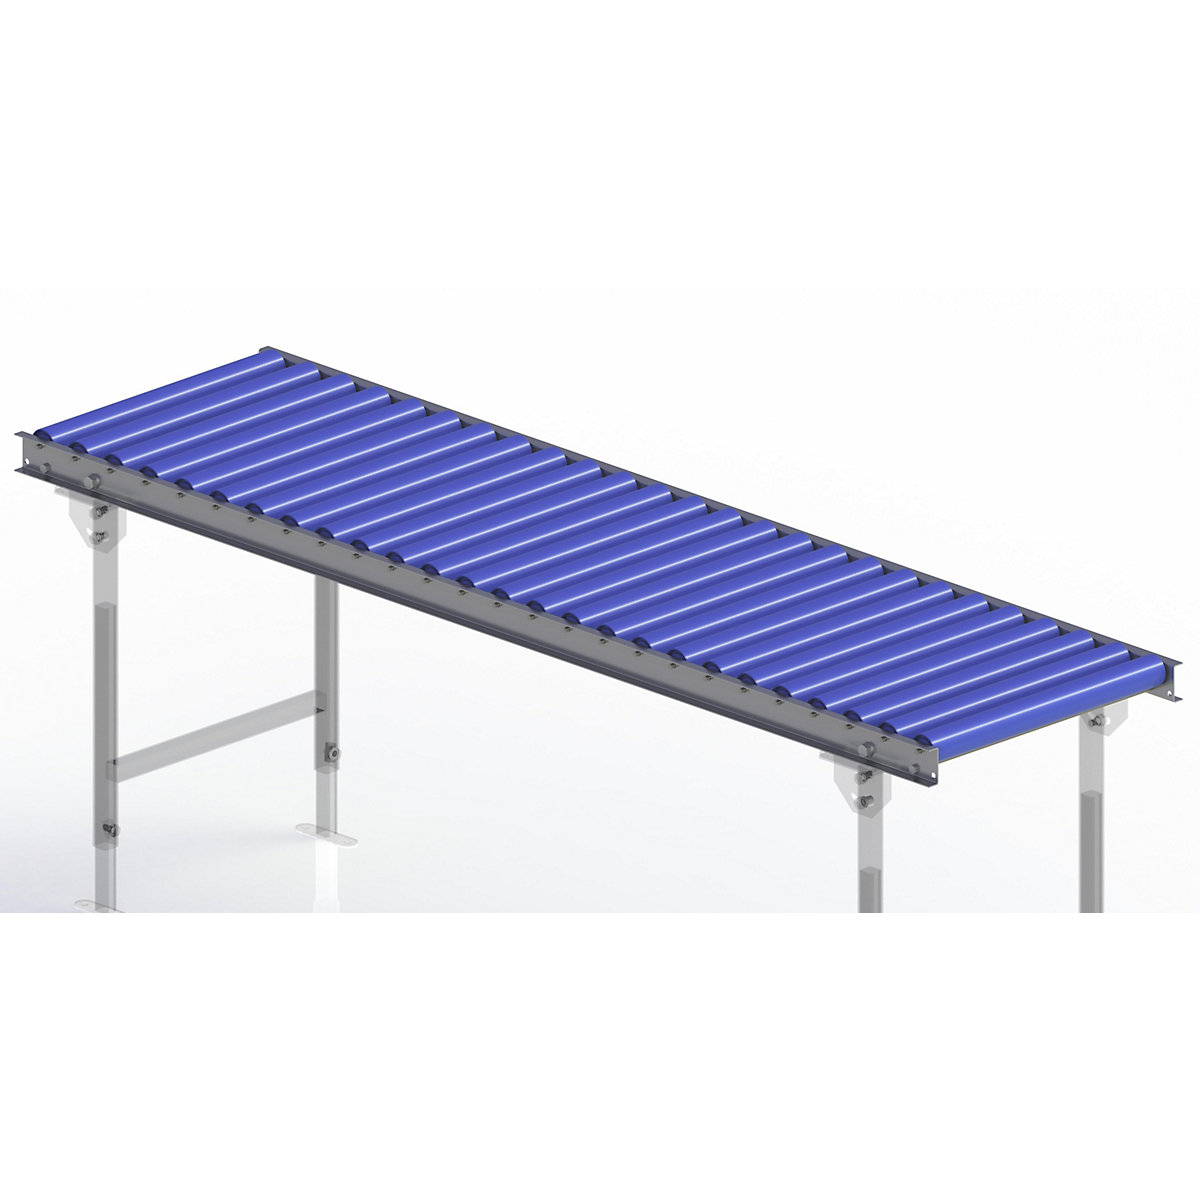 Gura – Light duty roller conveyor, steel frame with plastic rollers, track width 500 mm, axle spacing 75 mm, length 2.0 m